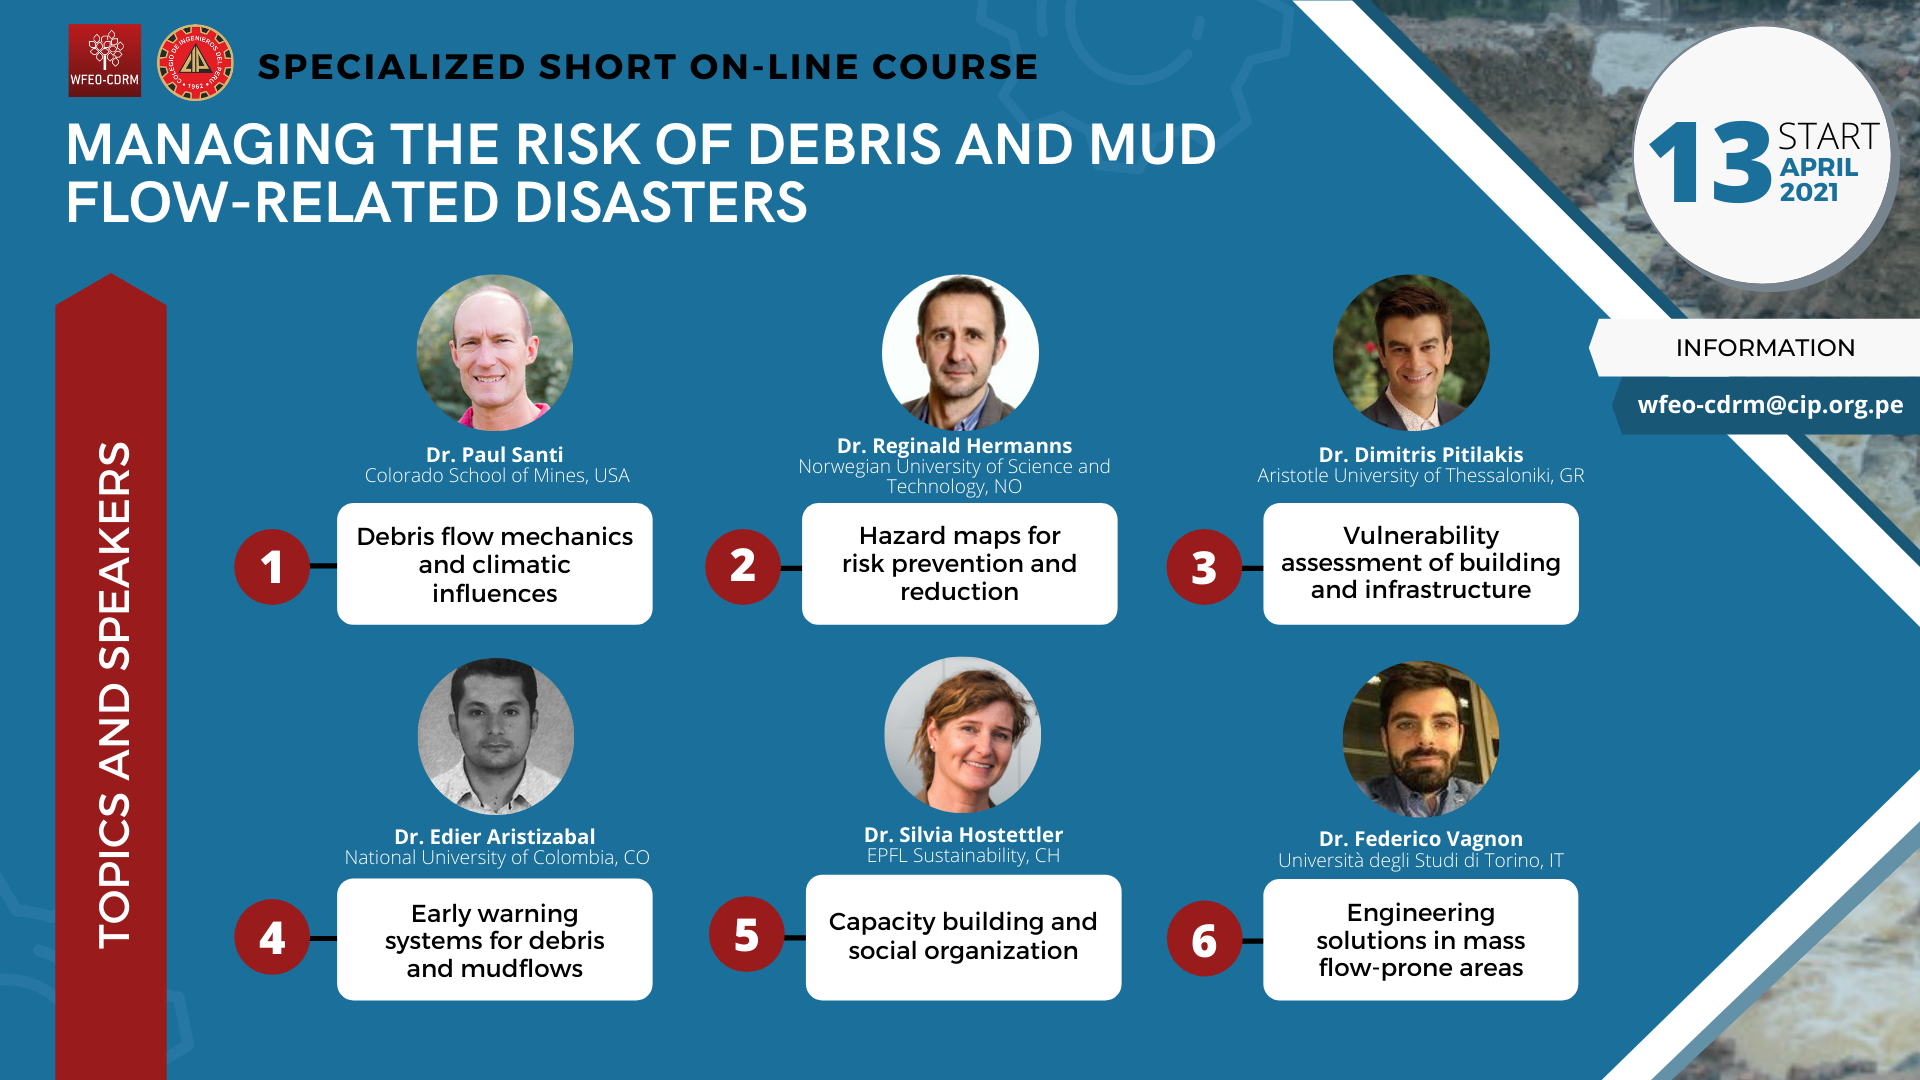 WFEO CDRM Online course: Managing the risk of debris and mud flow-related disasters